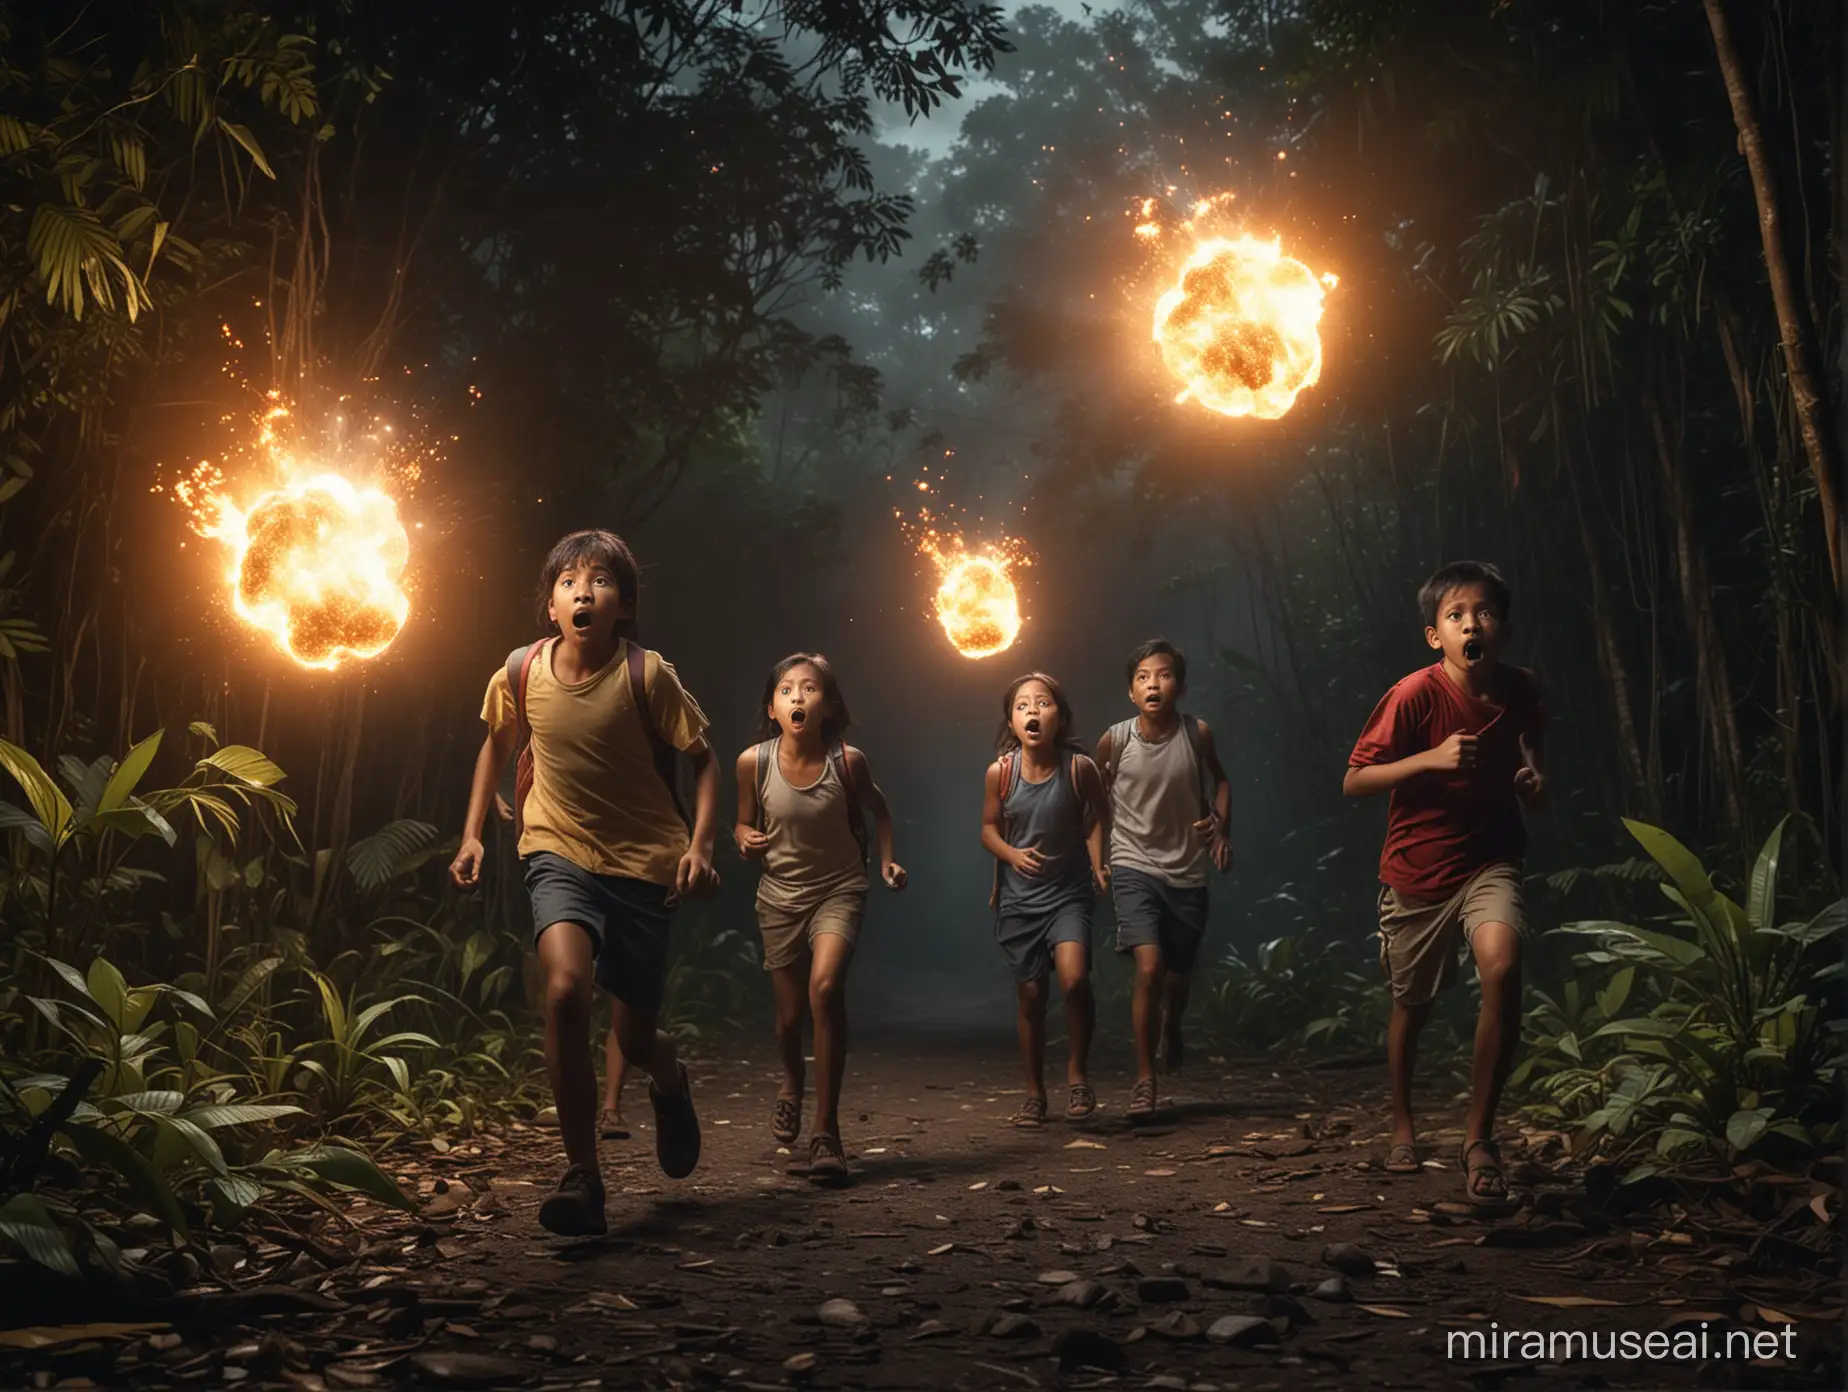 A group of scared Filipino children being chased by a floating fireball in the jungle while hiking at night, horror, cinematic